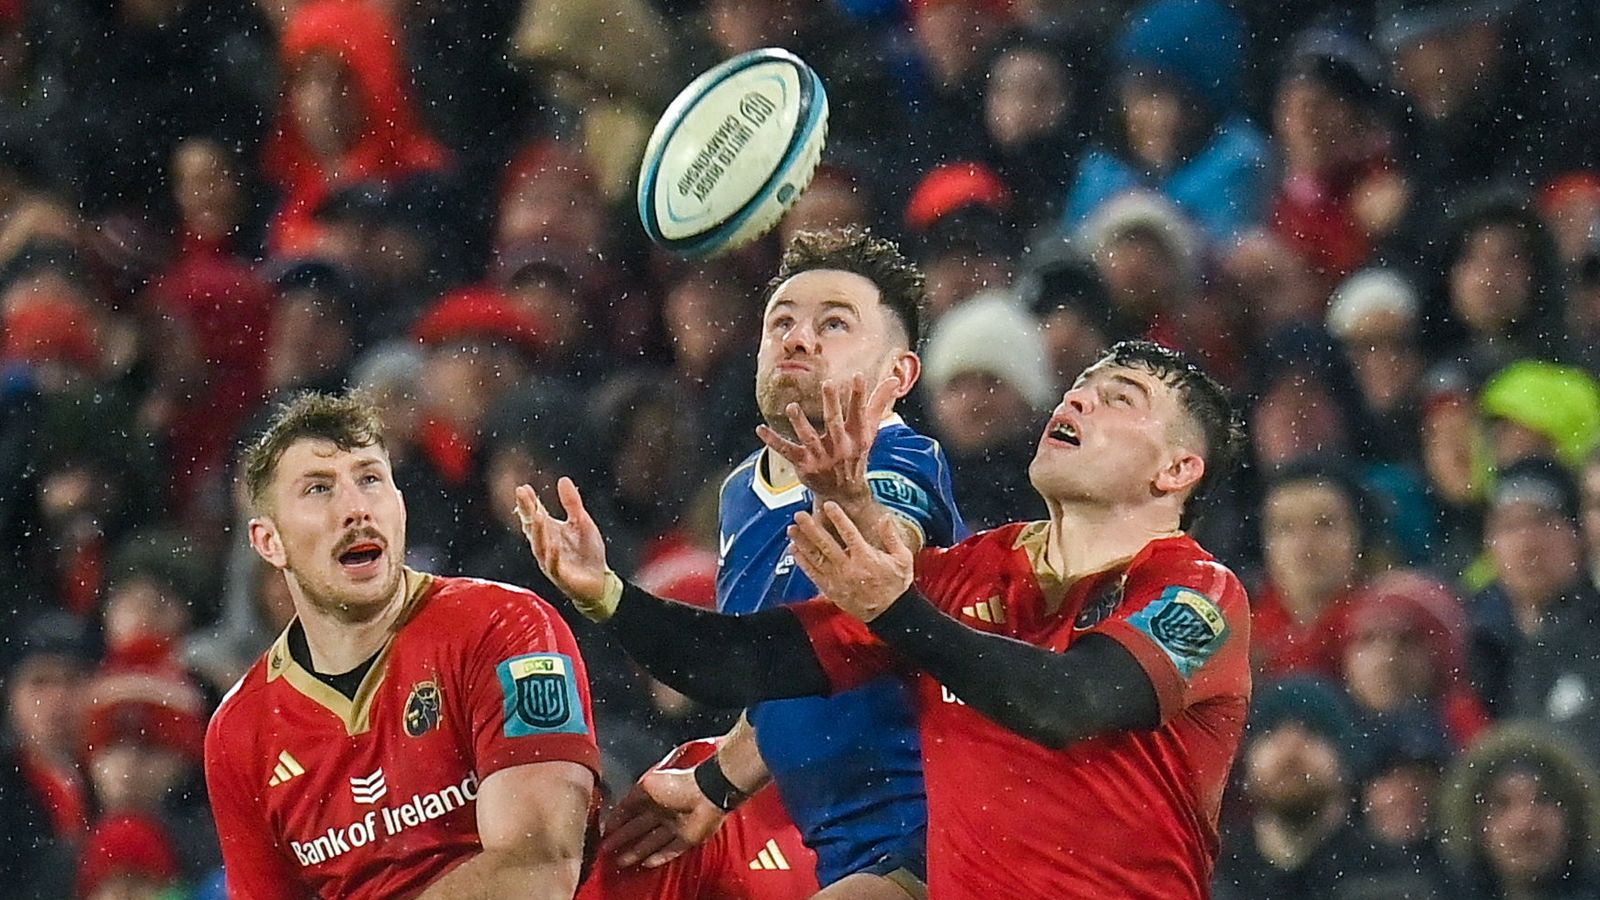 Munster 3-9 Leinster: Guests declare tight Irish provincial St Stephen’s Day derby victory in atrocious situations